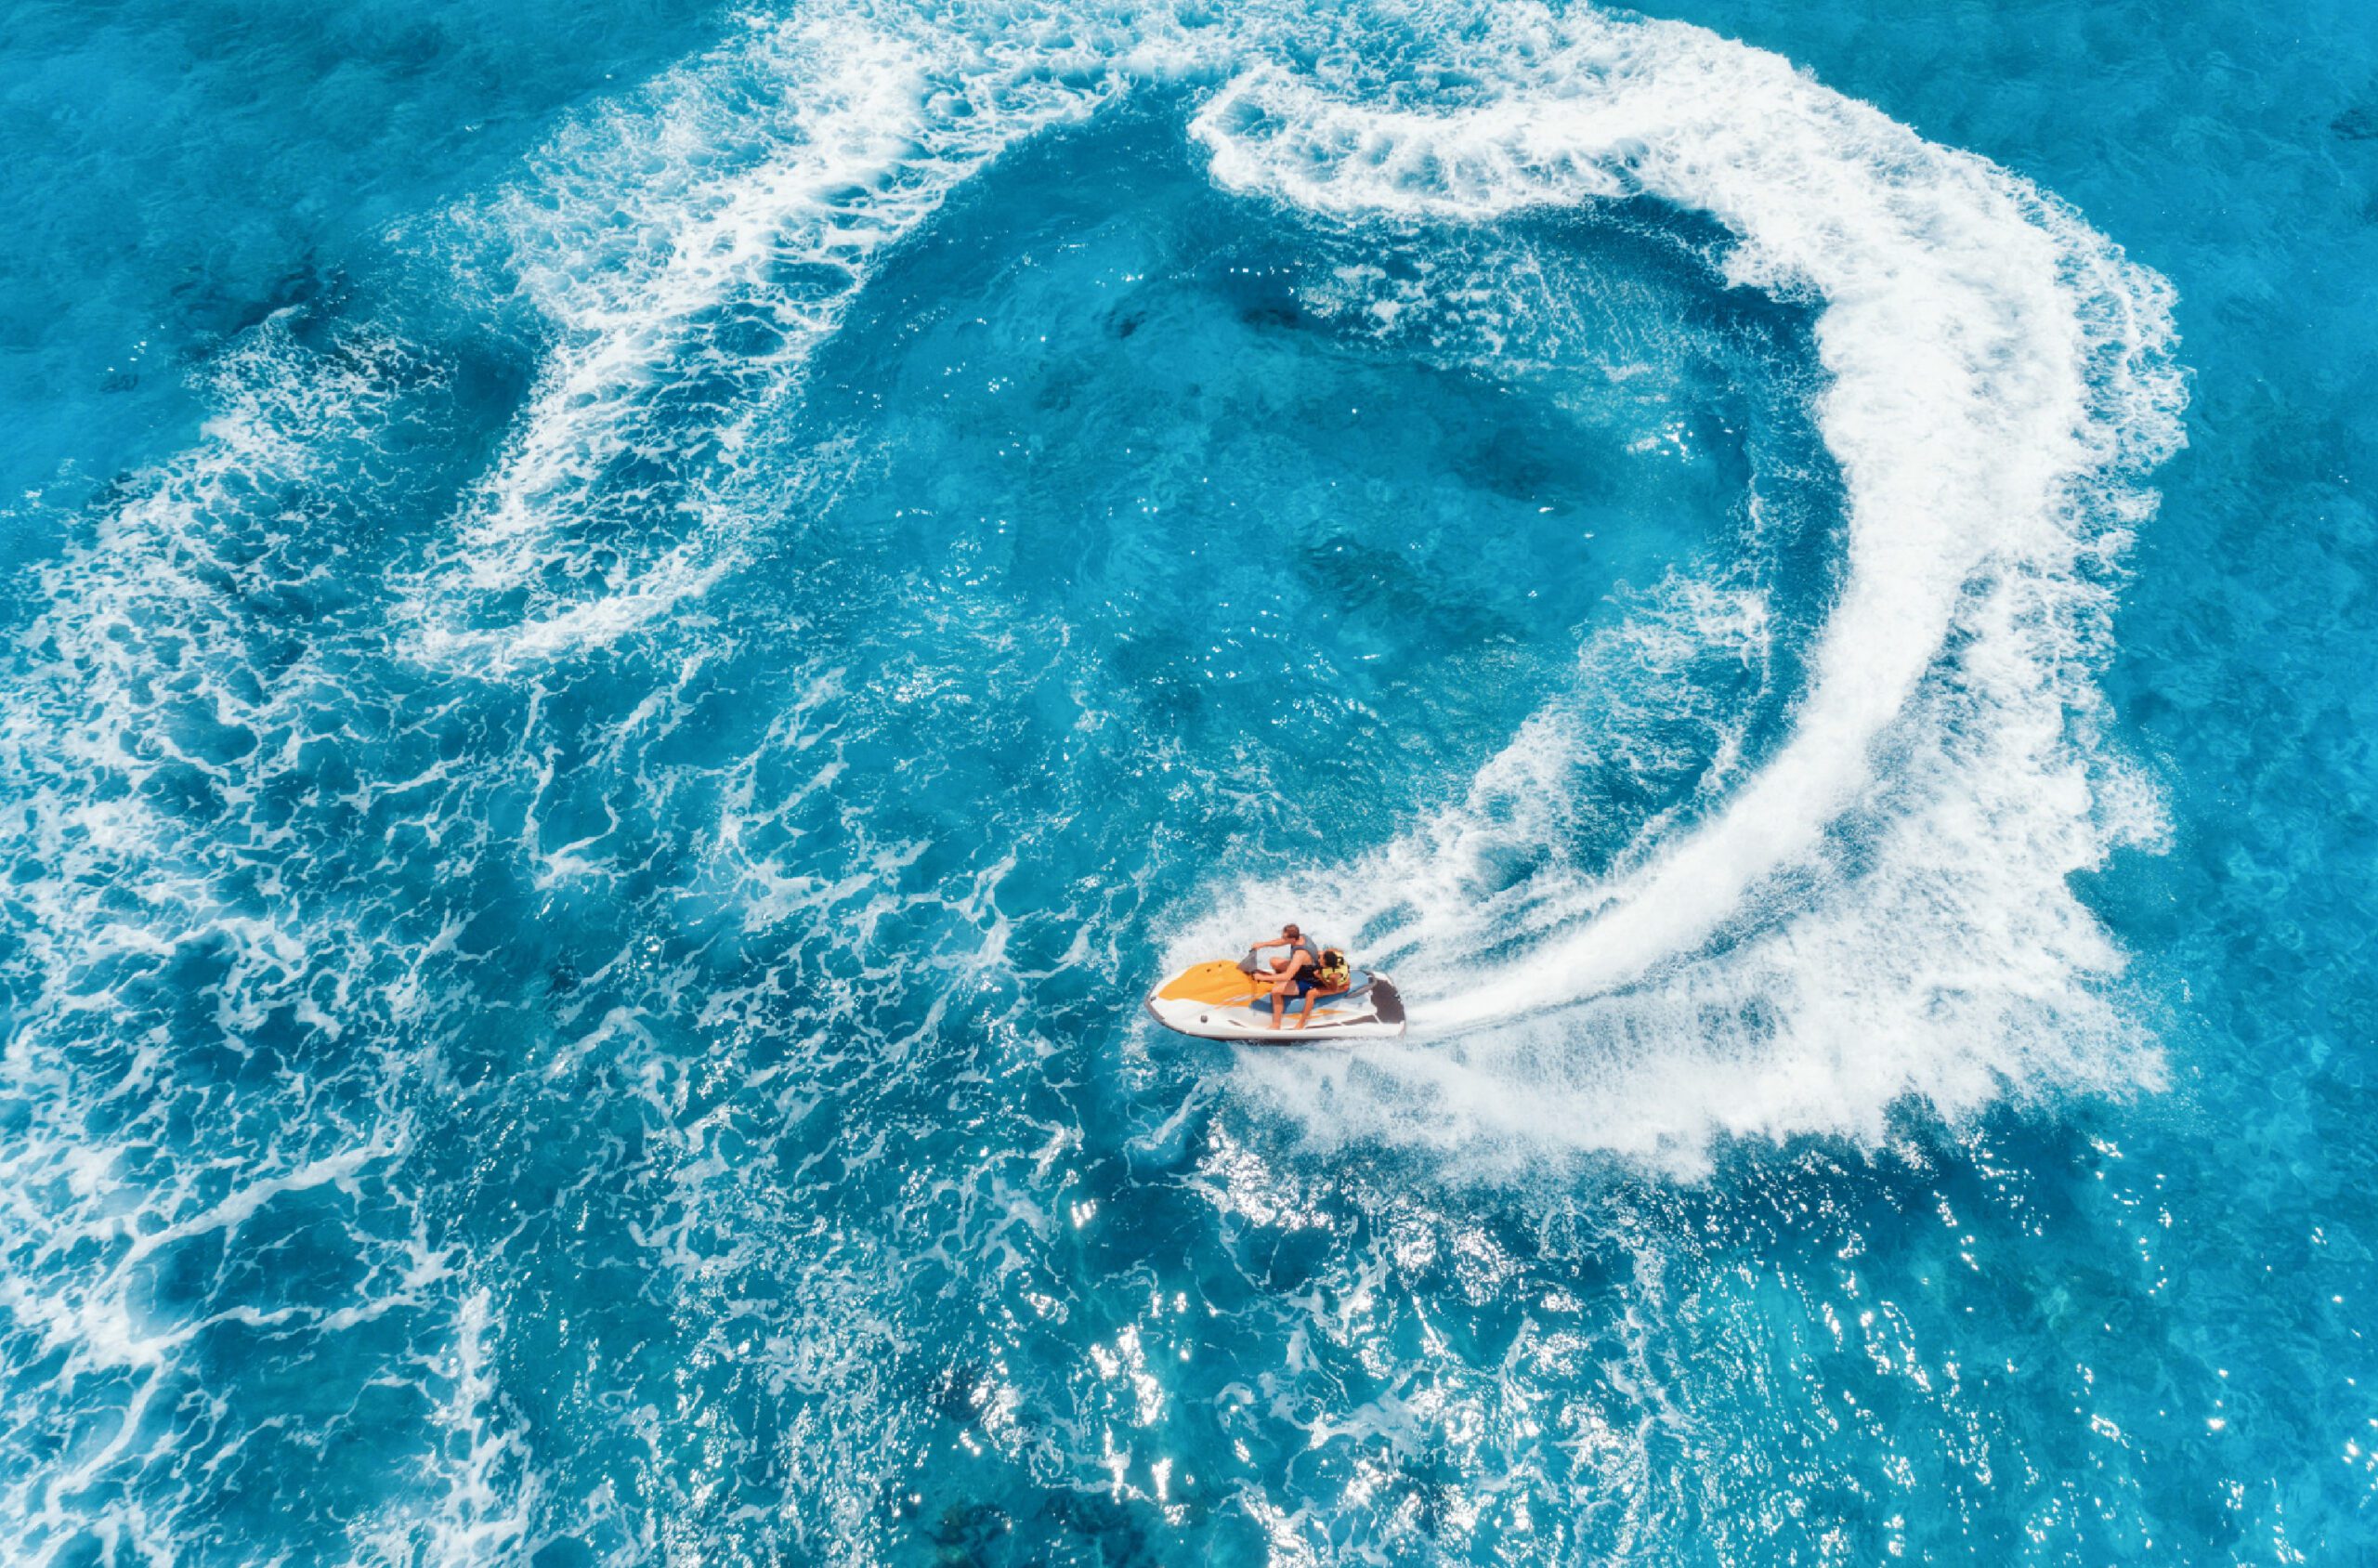 Glide through the waves with Jetski